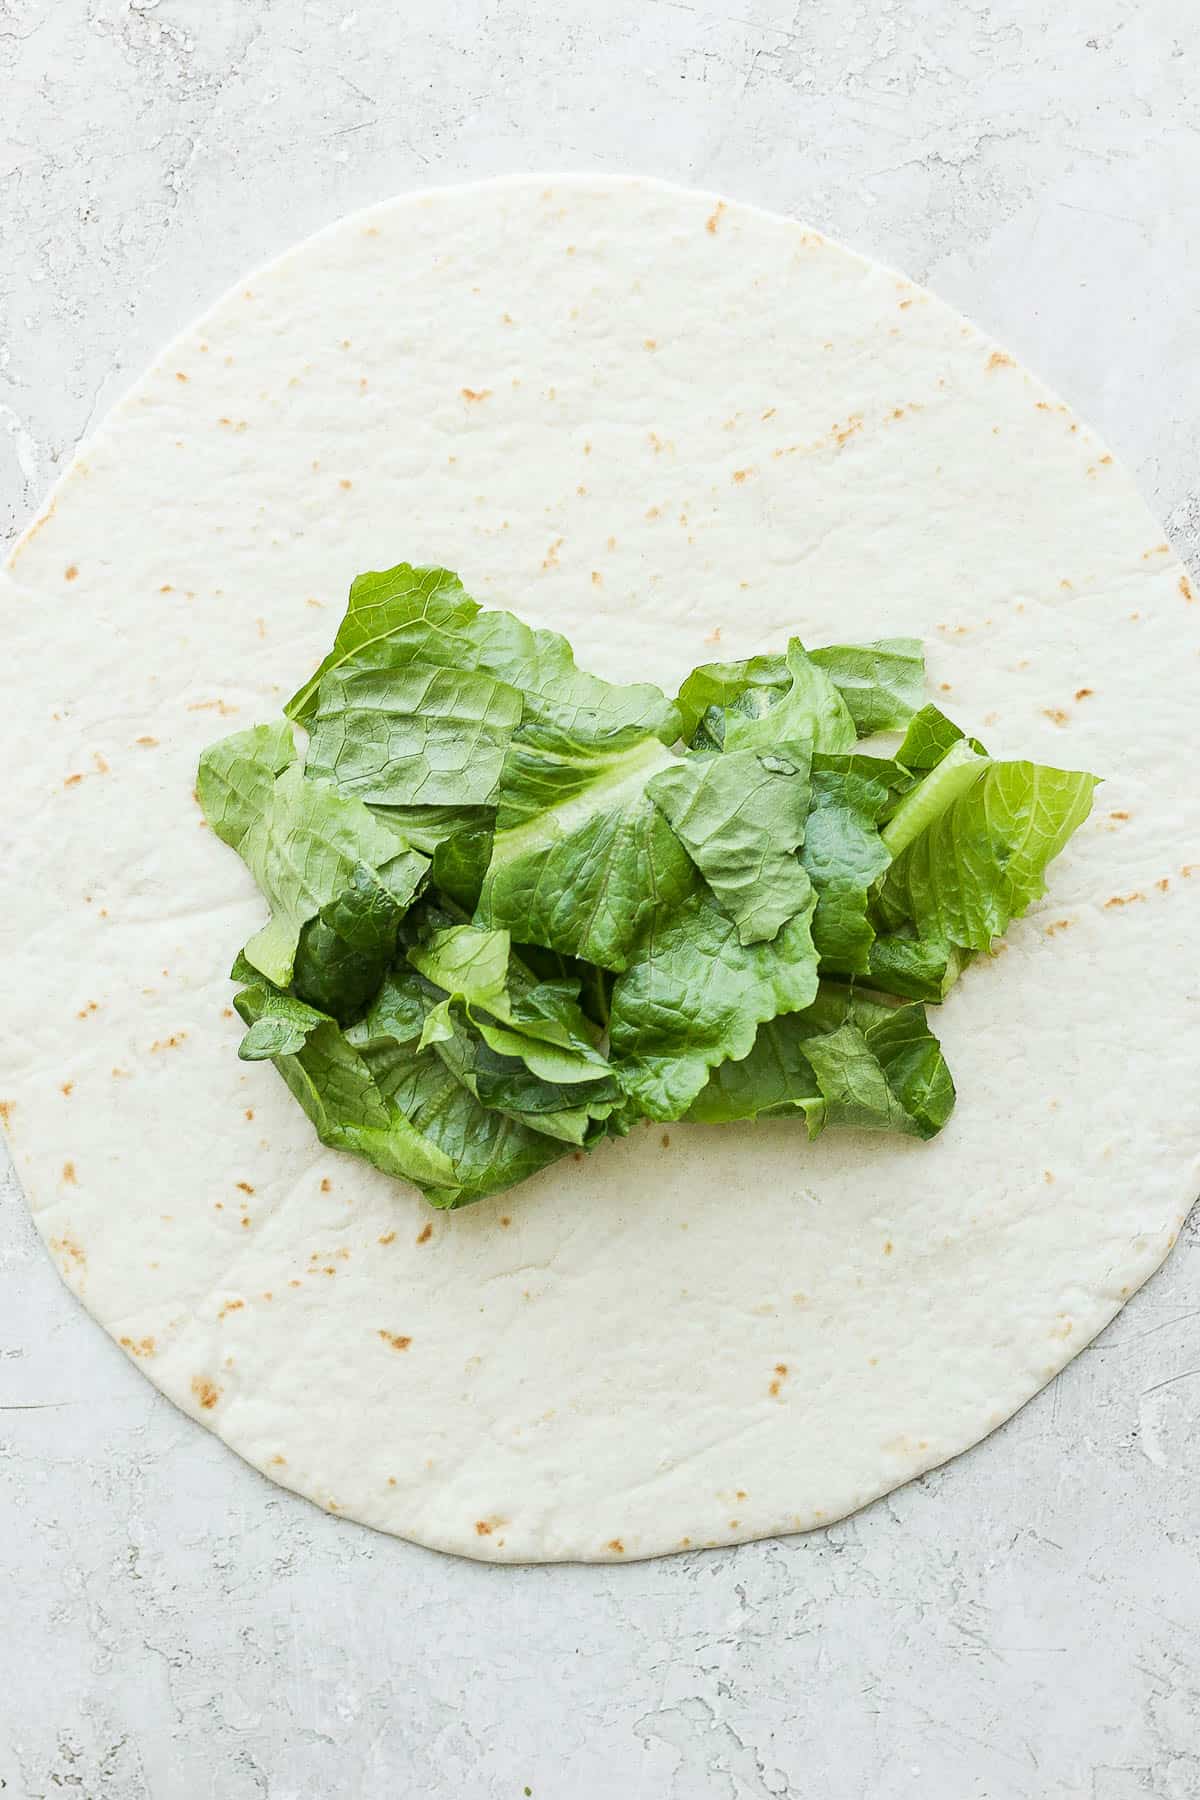 A burrito-sized tortilla with lettuce in the middle to begin the wrap.